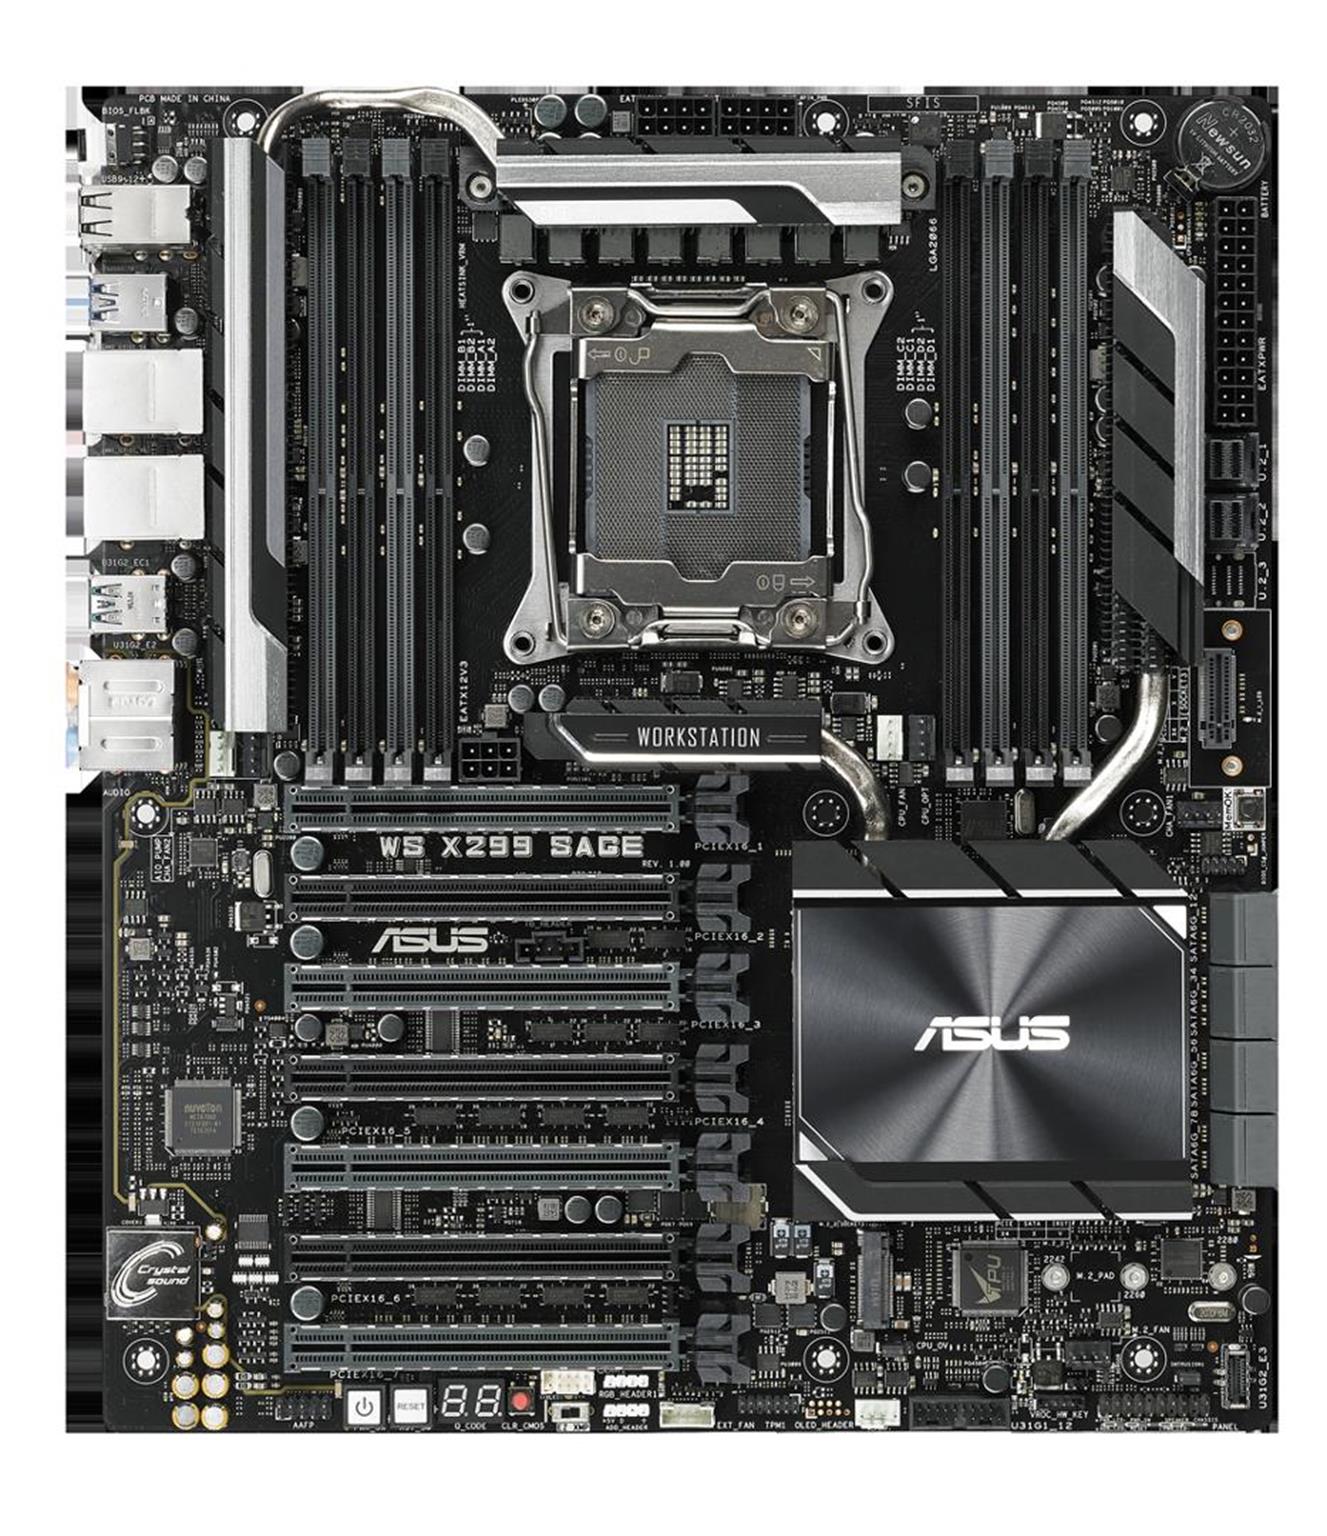 ASUS Announces X299 WS Series Motherboards